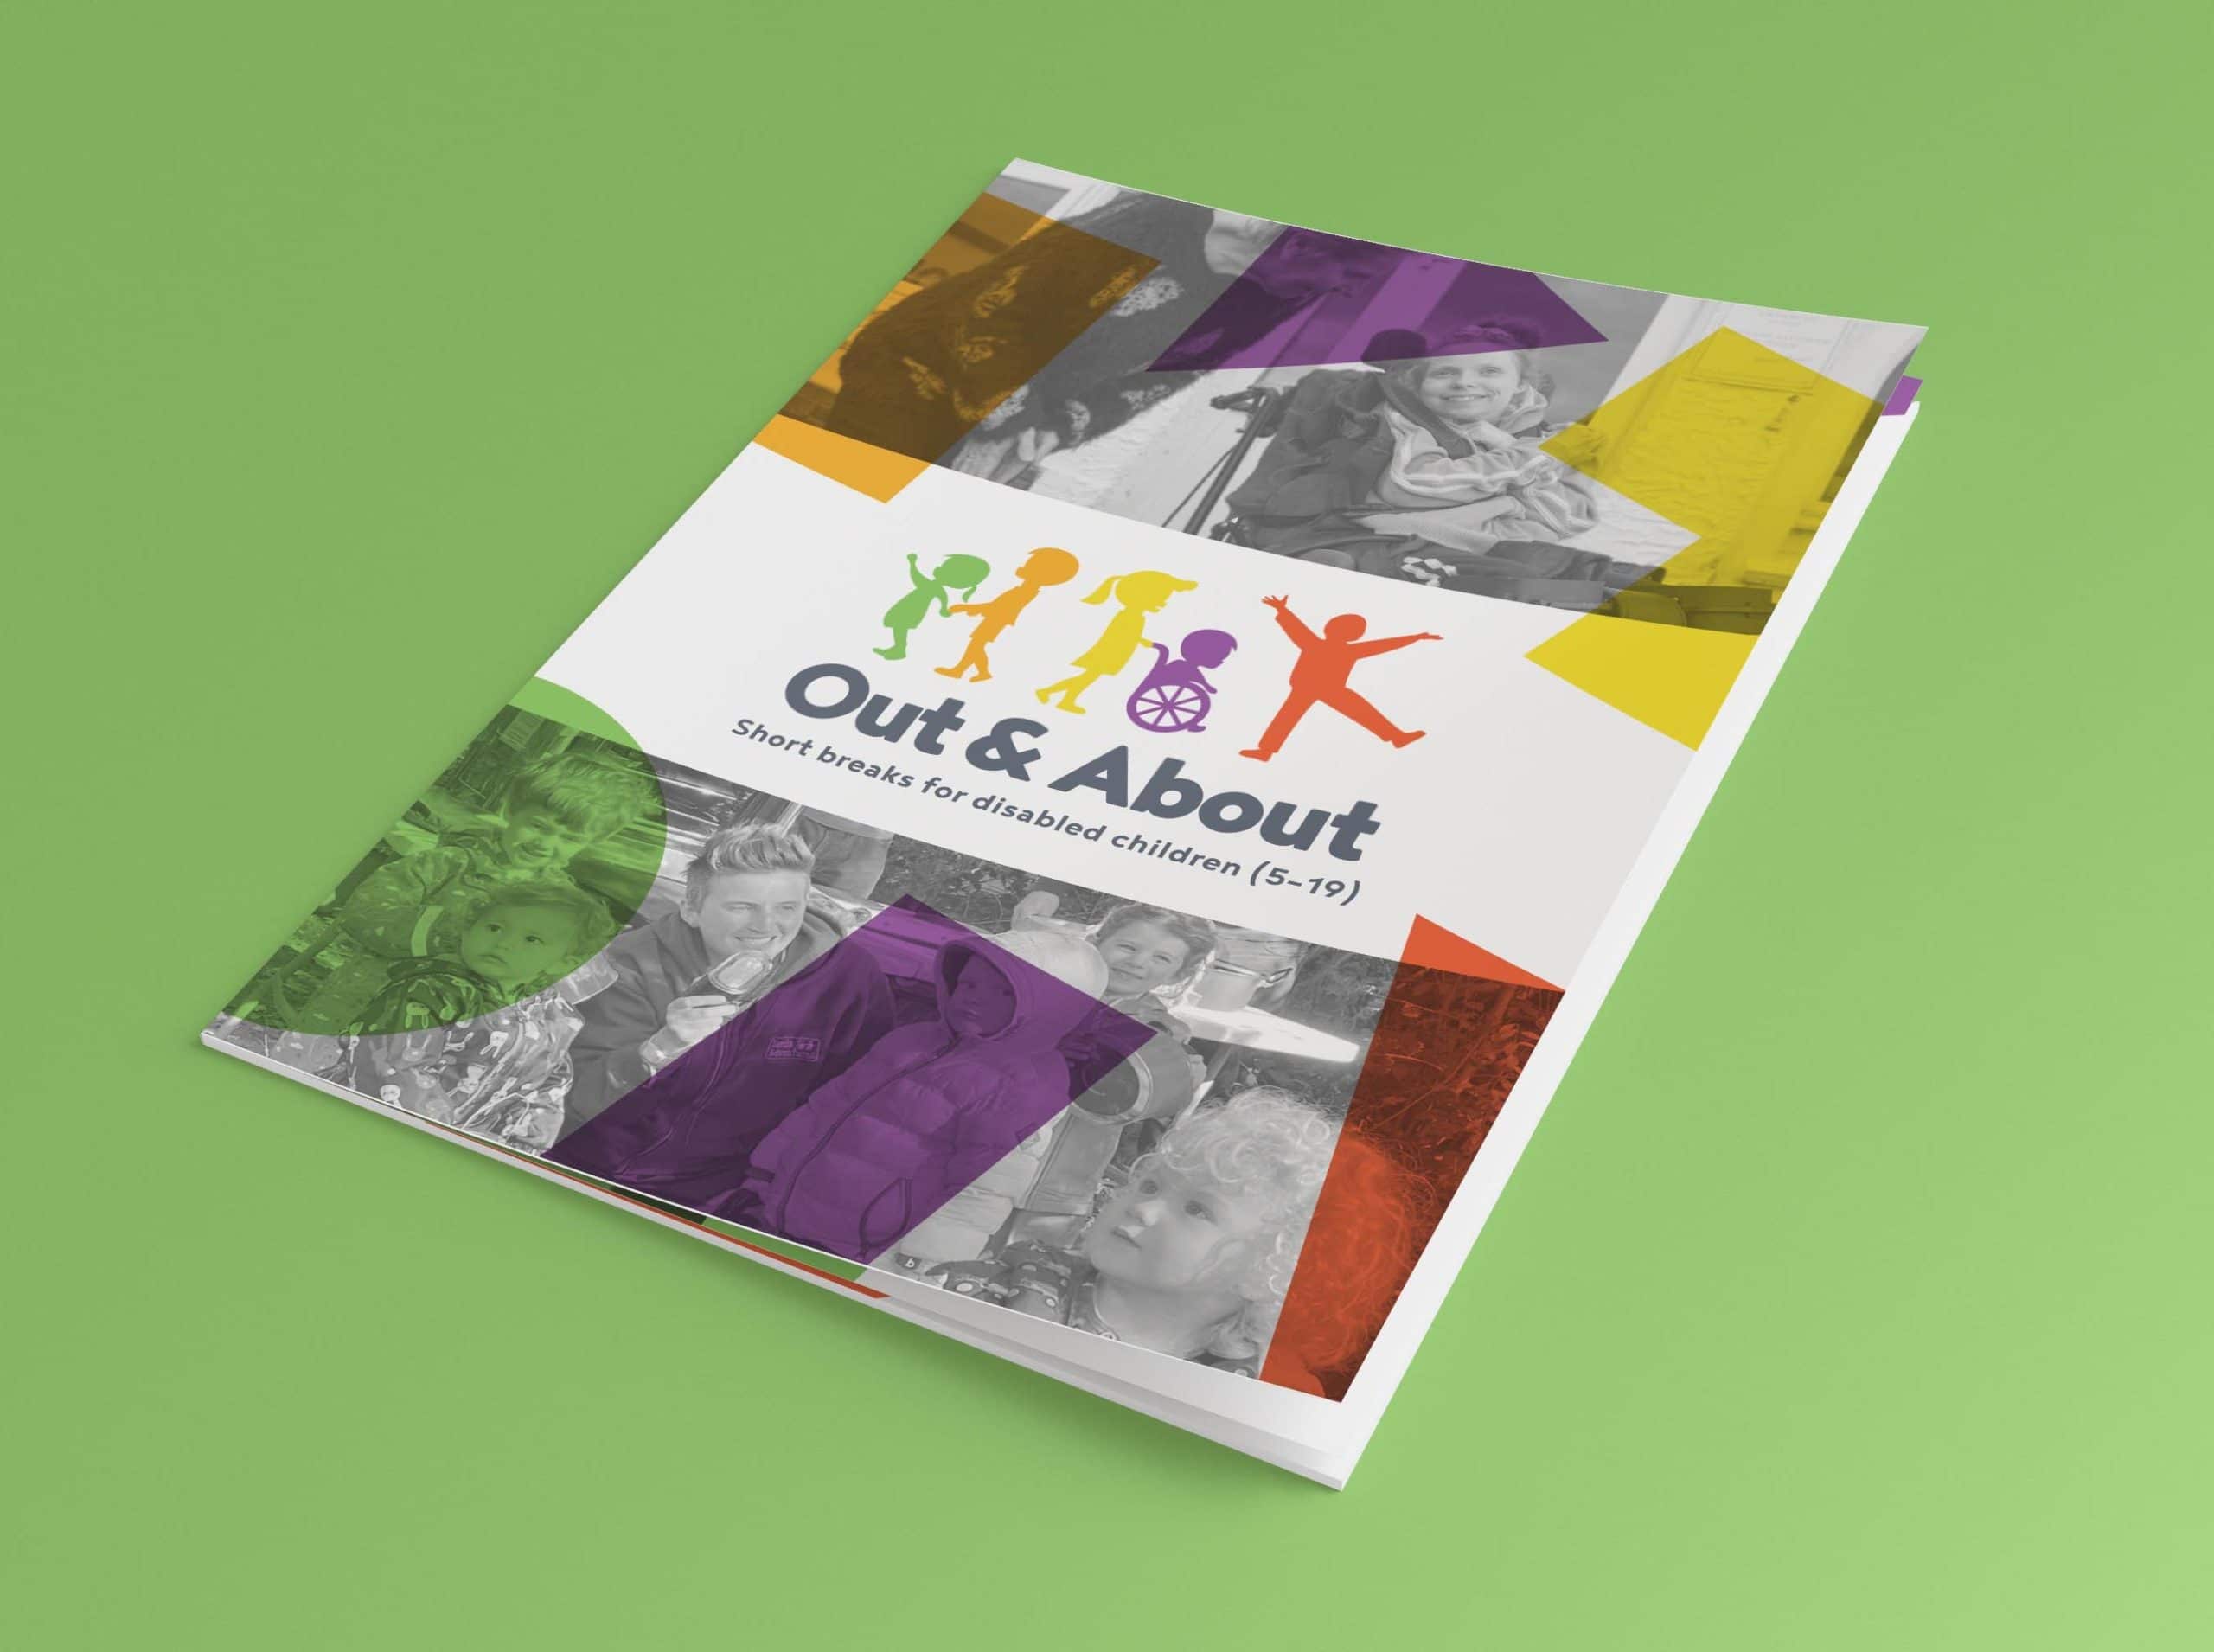 Out and about cover brochure mockup